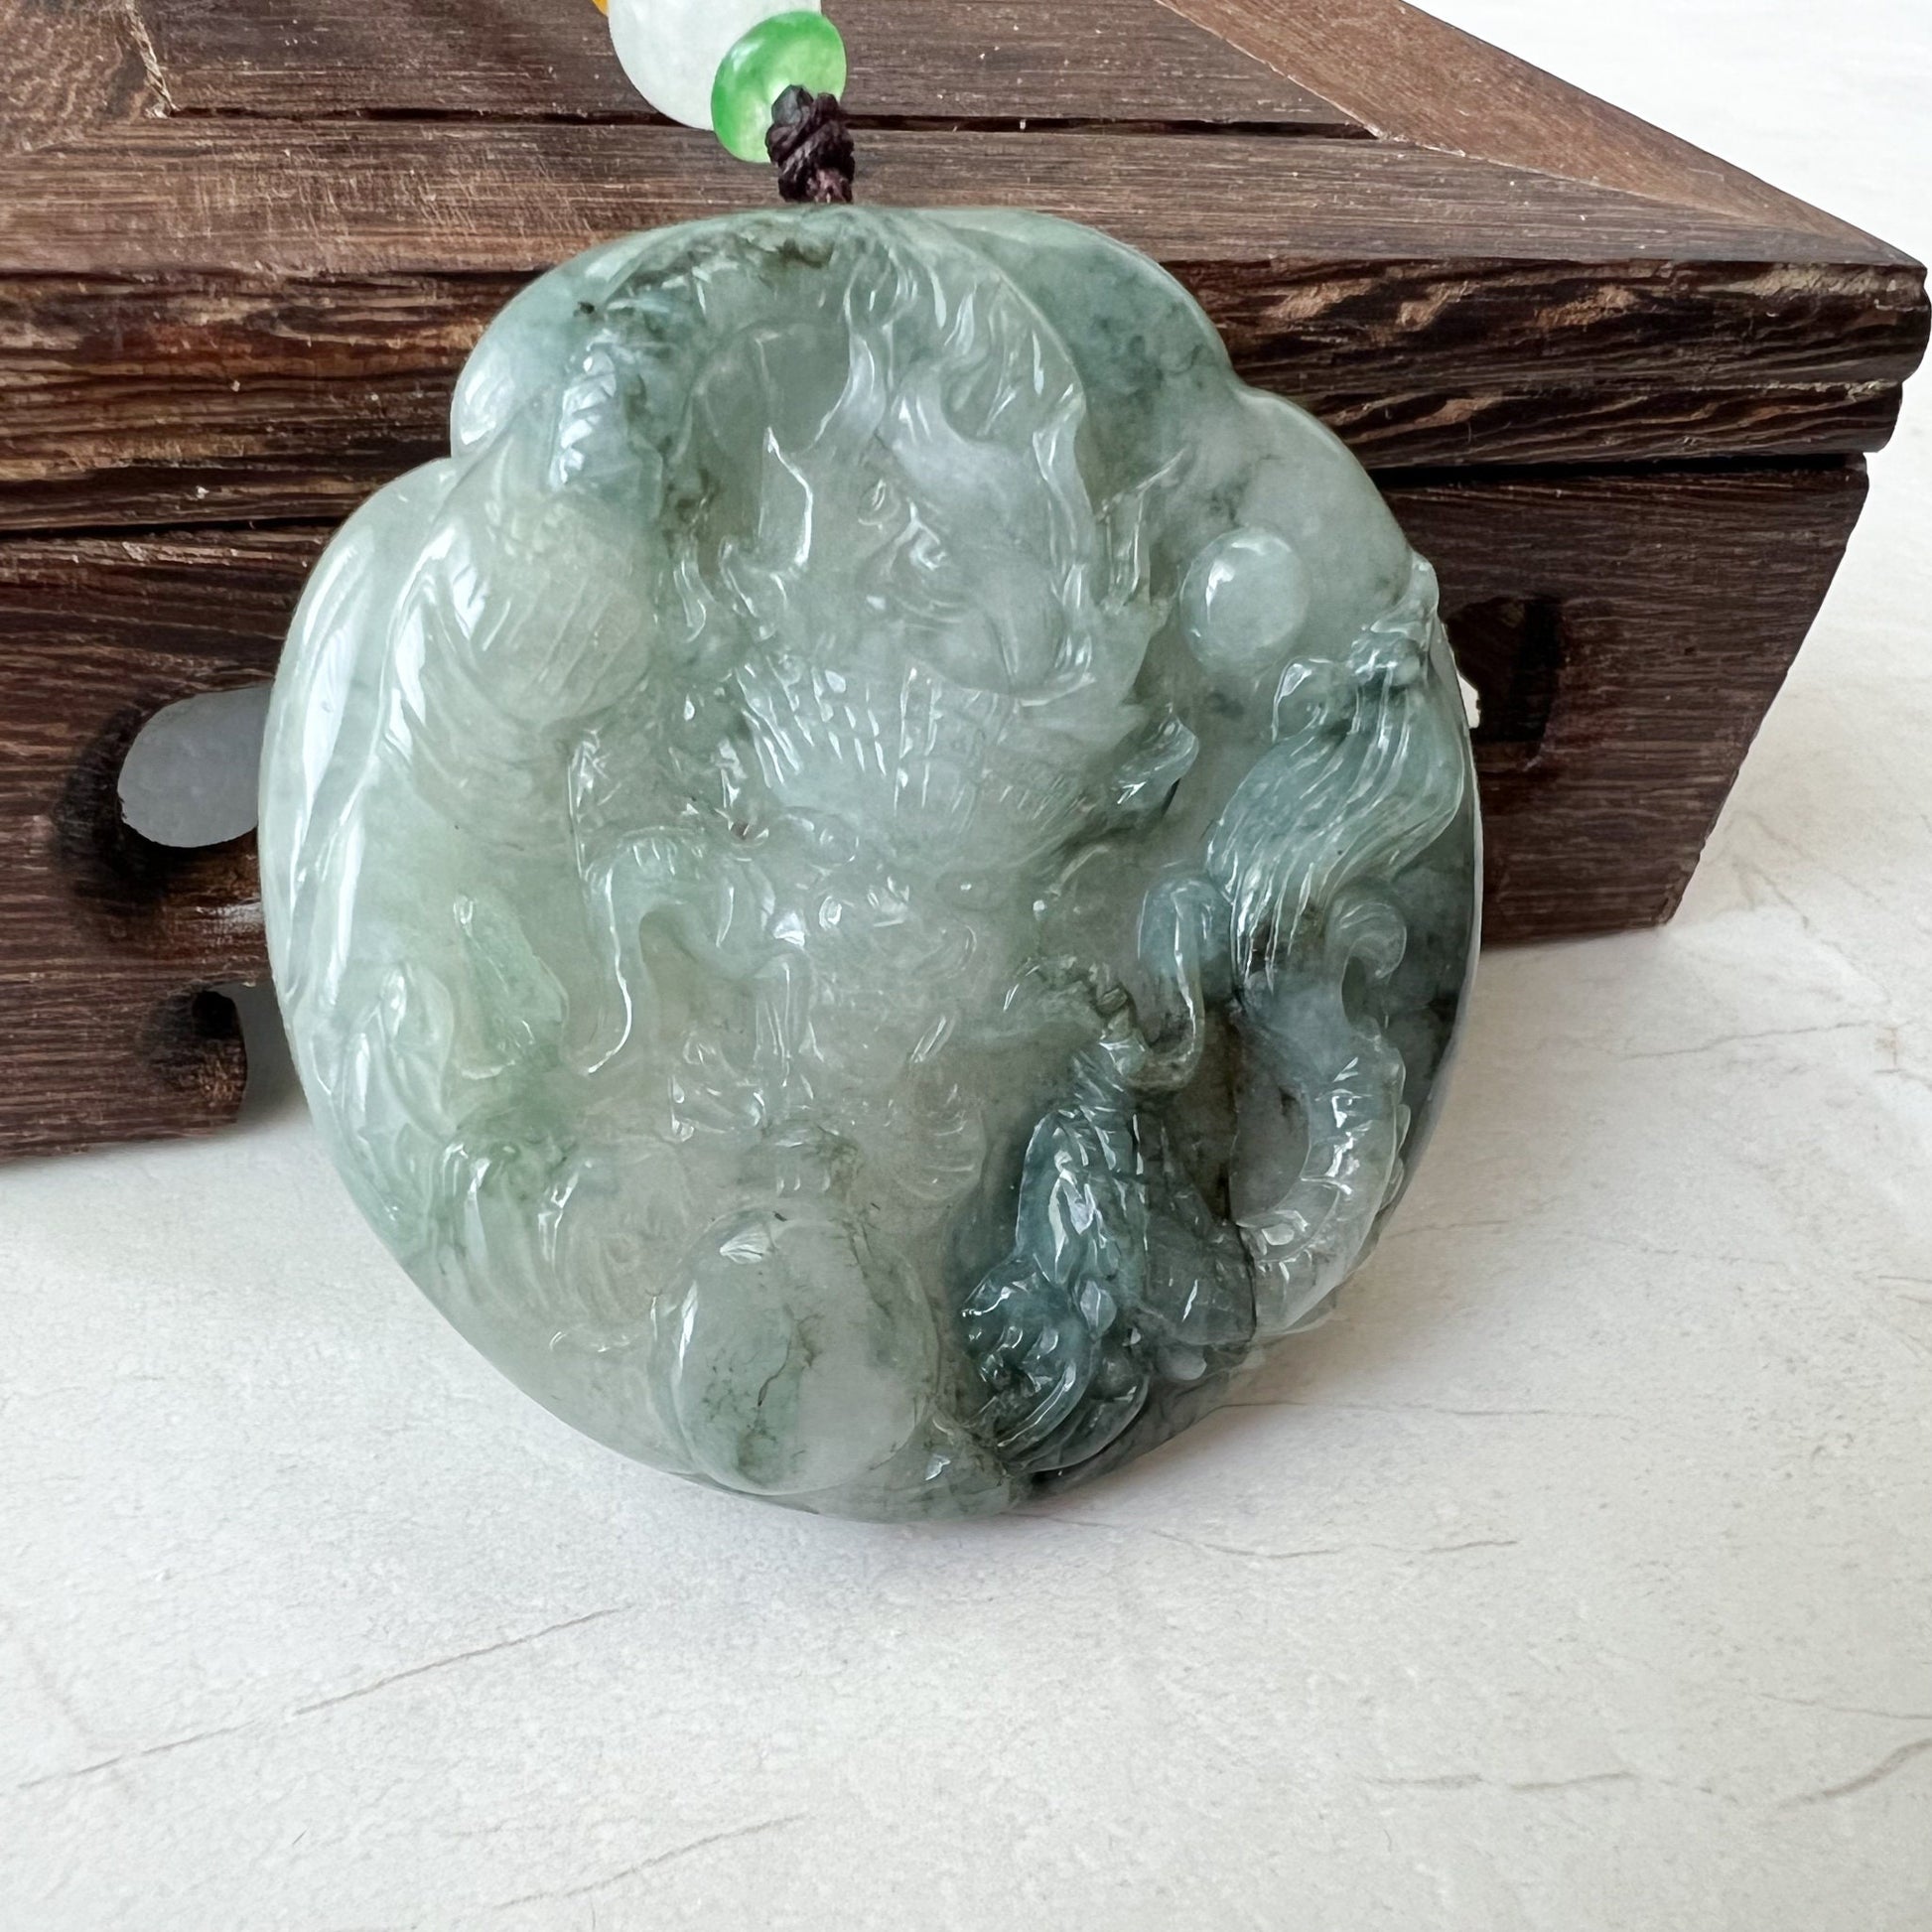 Icy Translucent Green Jadeite Jade Dragon Chinese Zodiac Hand Carved Pendant Necklace, YJ-0322-0355363 - AriaDesignCollection